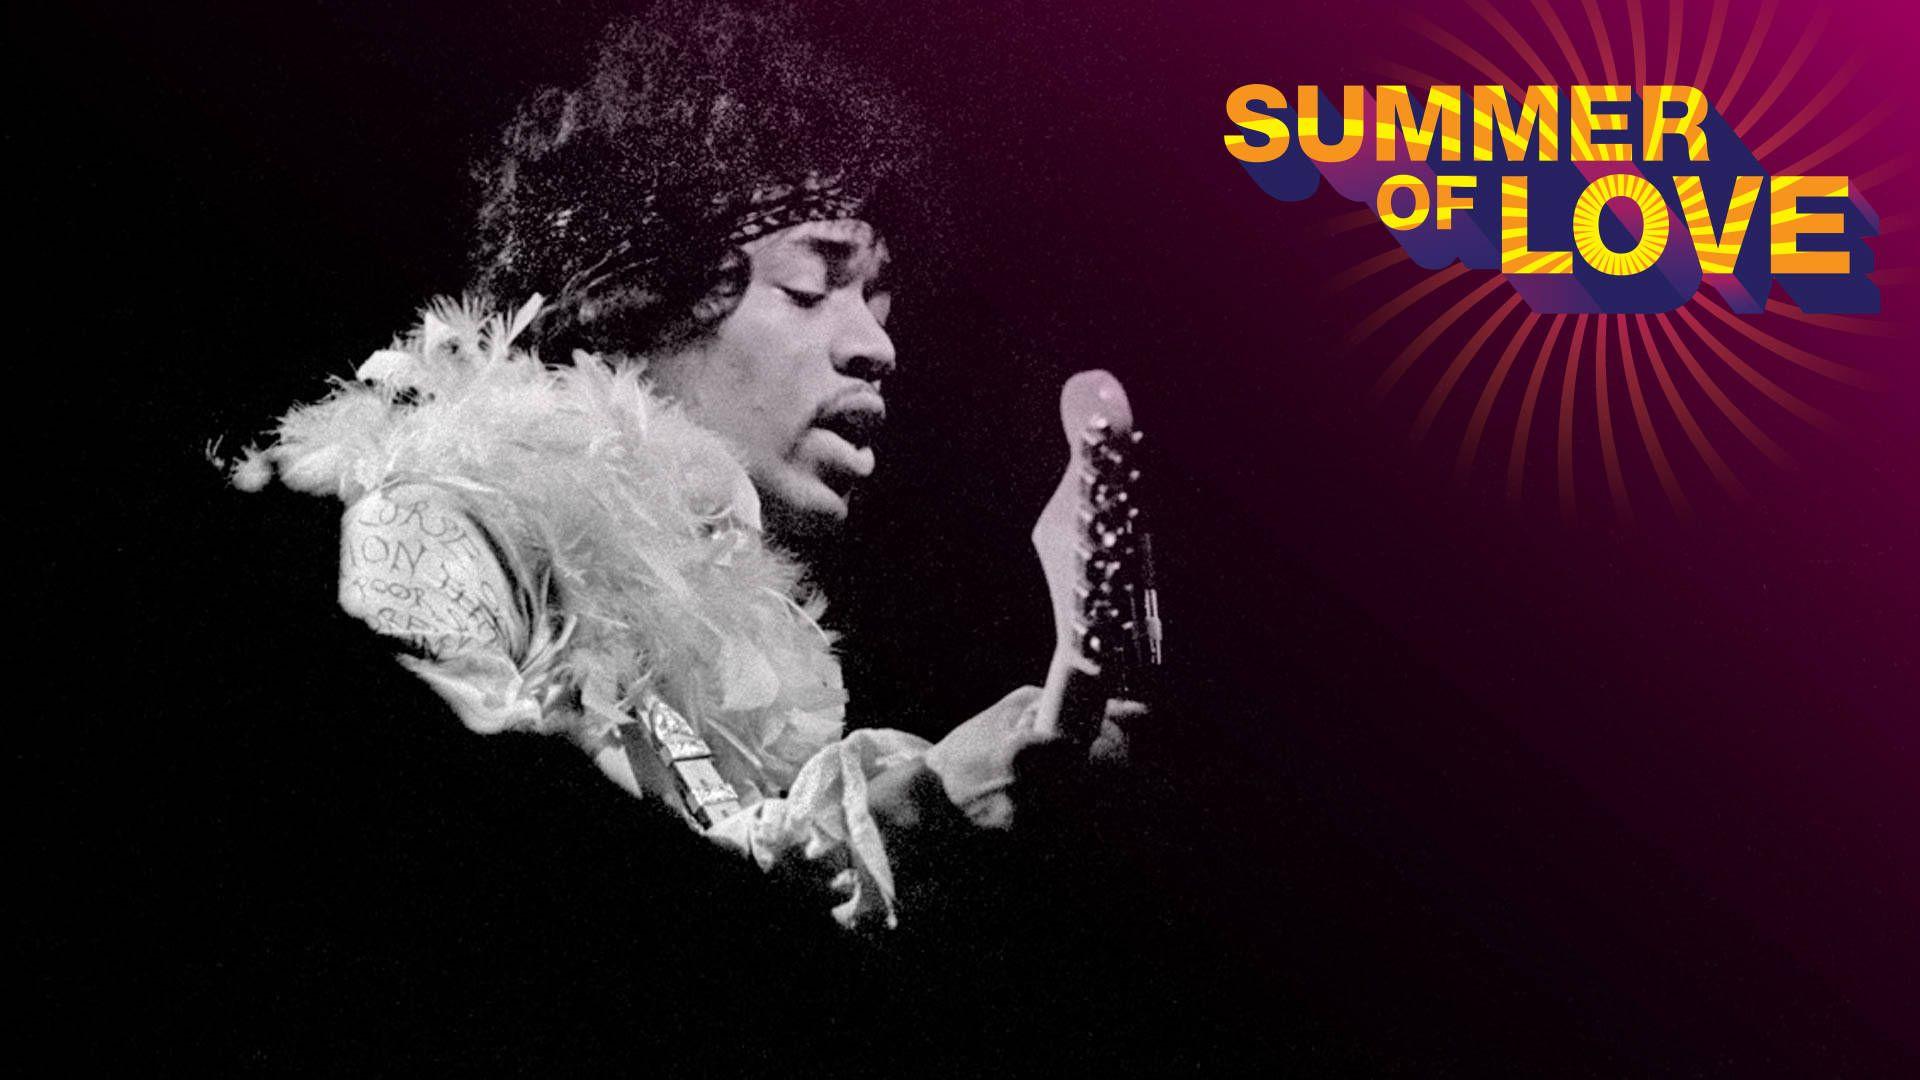 She Photographed Jimi Hendrix Without Knowing His Name. Summer Of